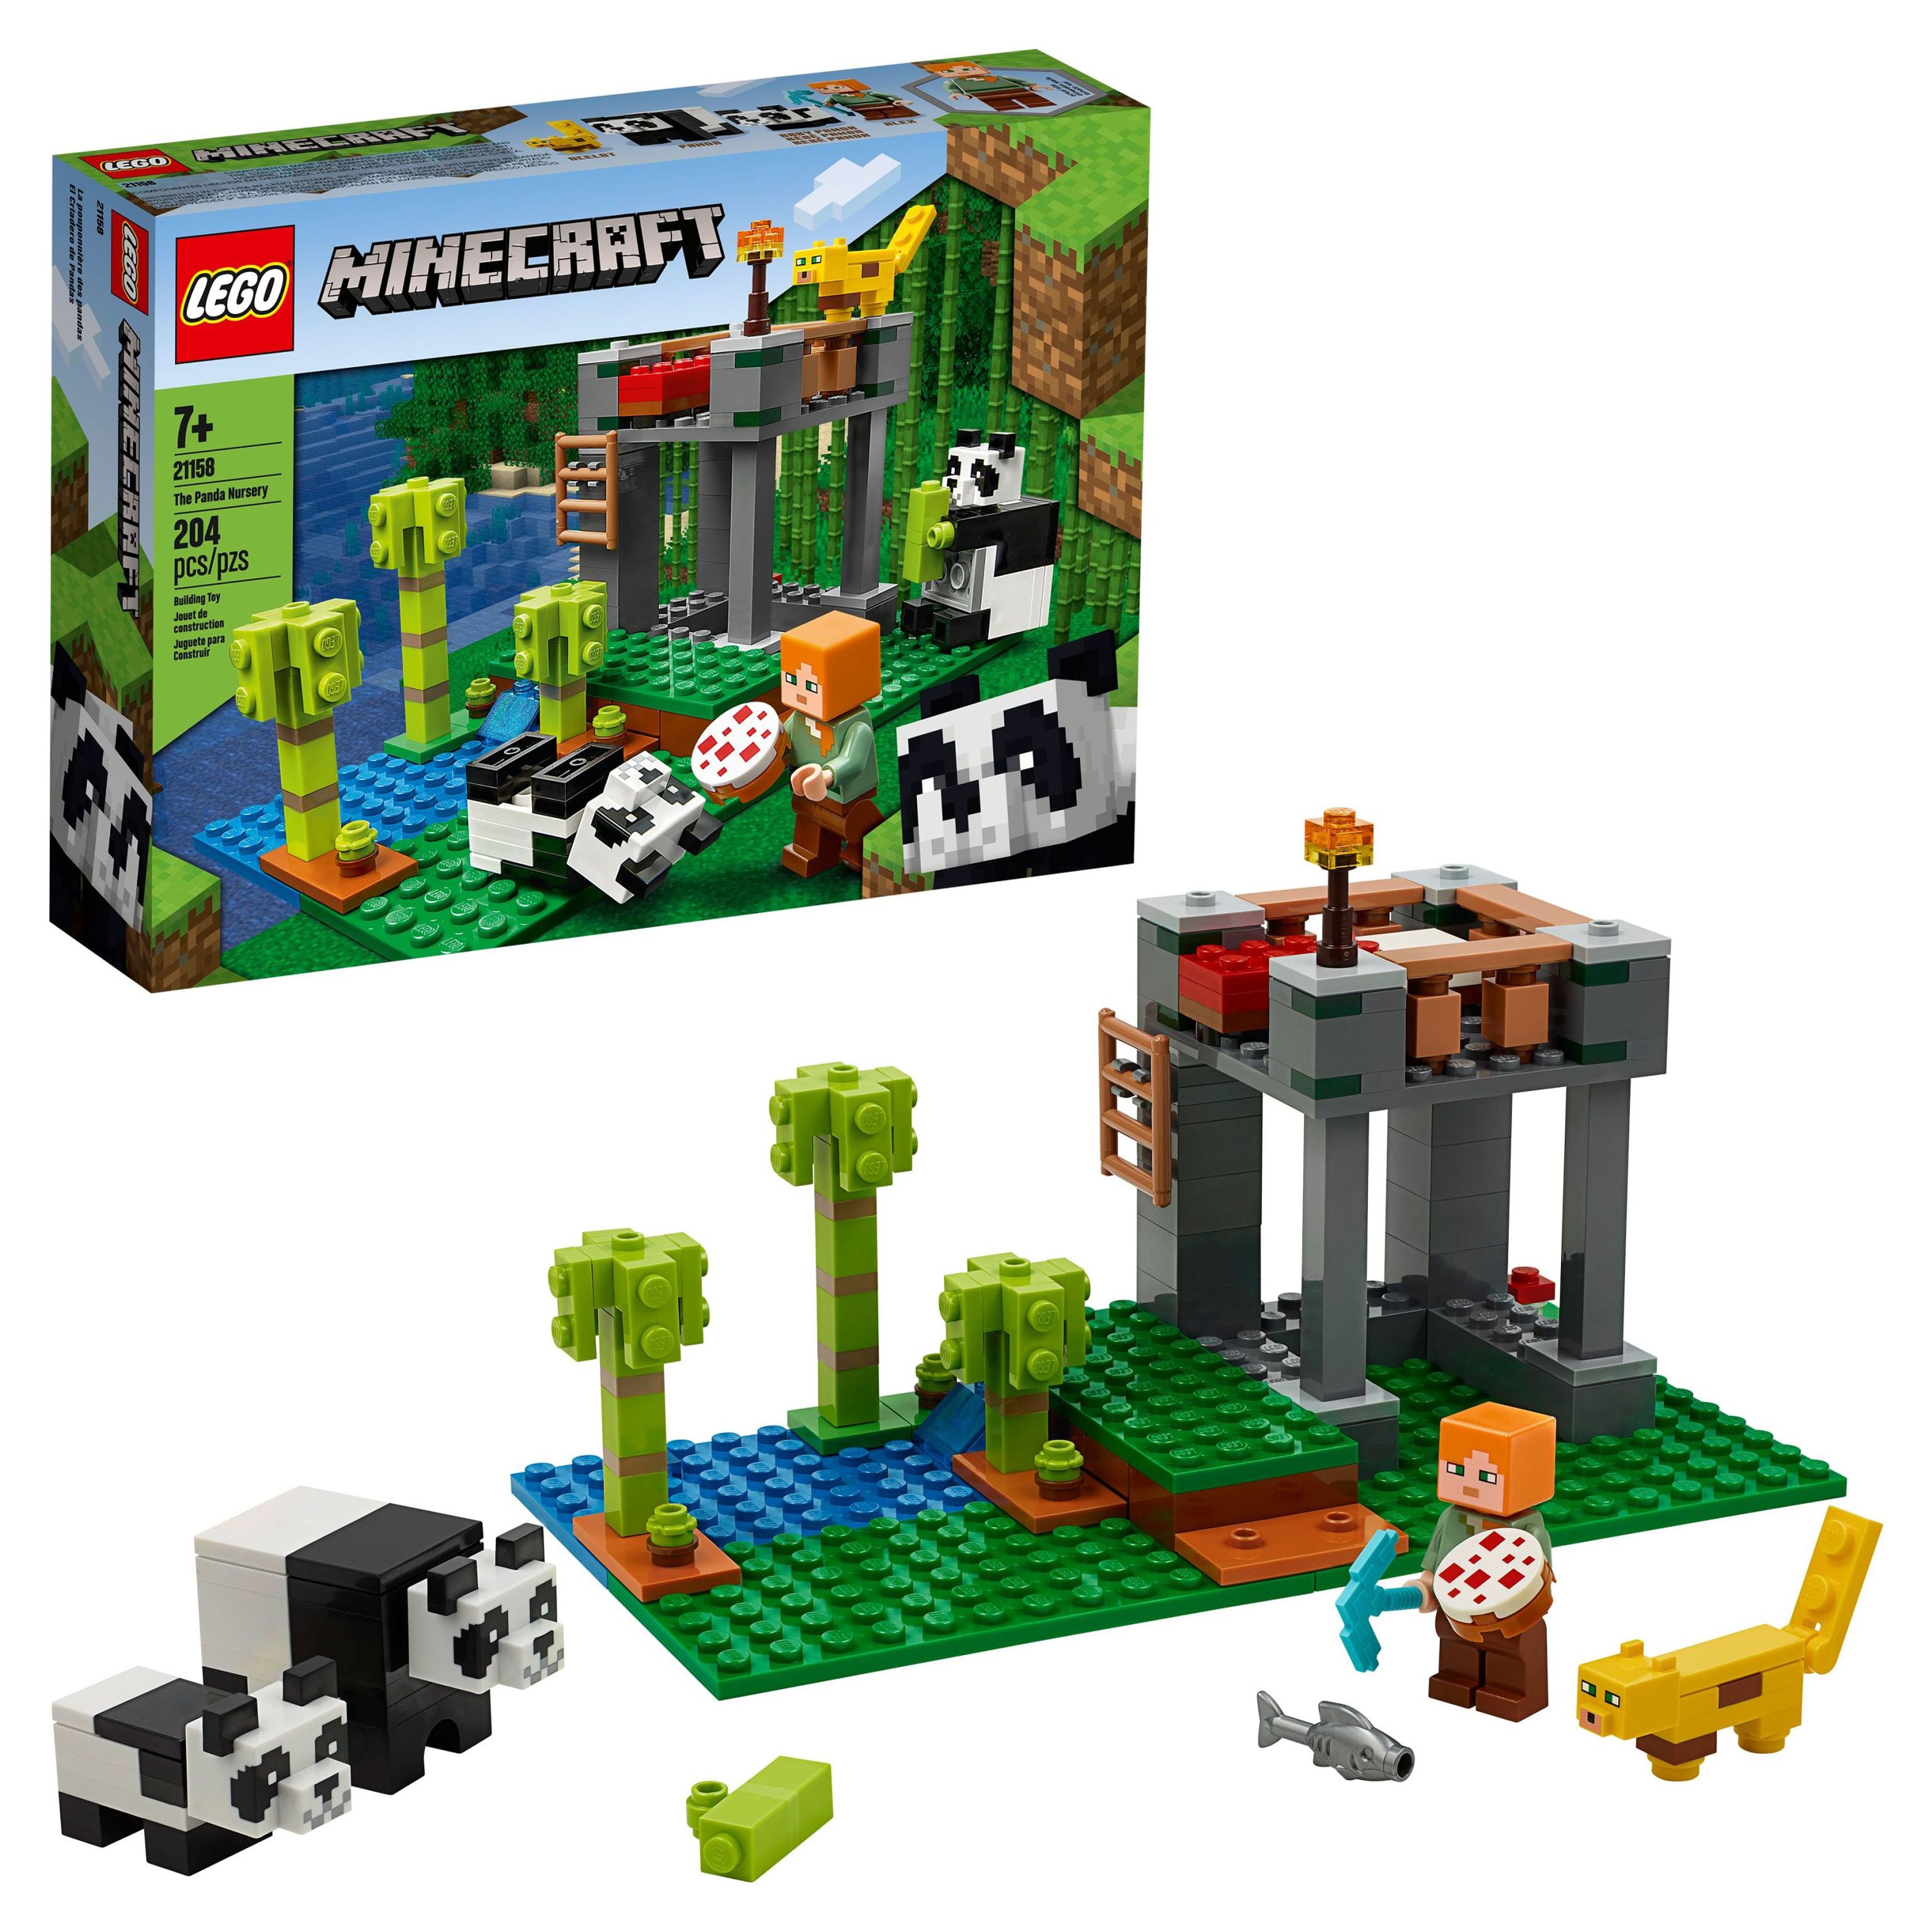 LEGO Minecraft The Panda Nursery 21158 Construction Toy for Kids, Great Creative Gift for Fans of Minecraft (204 Pieces) - image 1 of 7